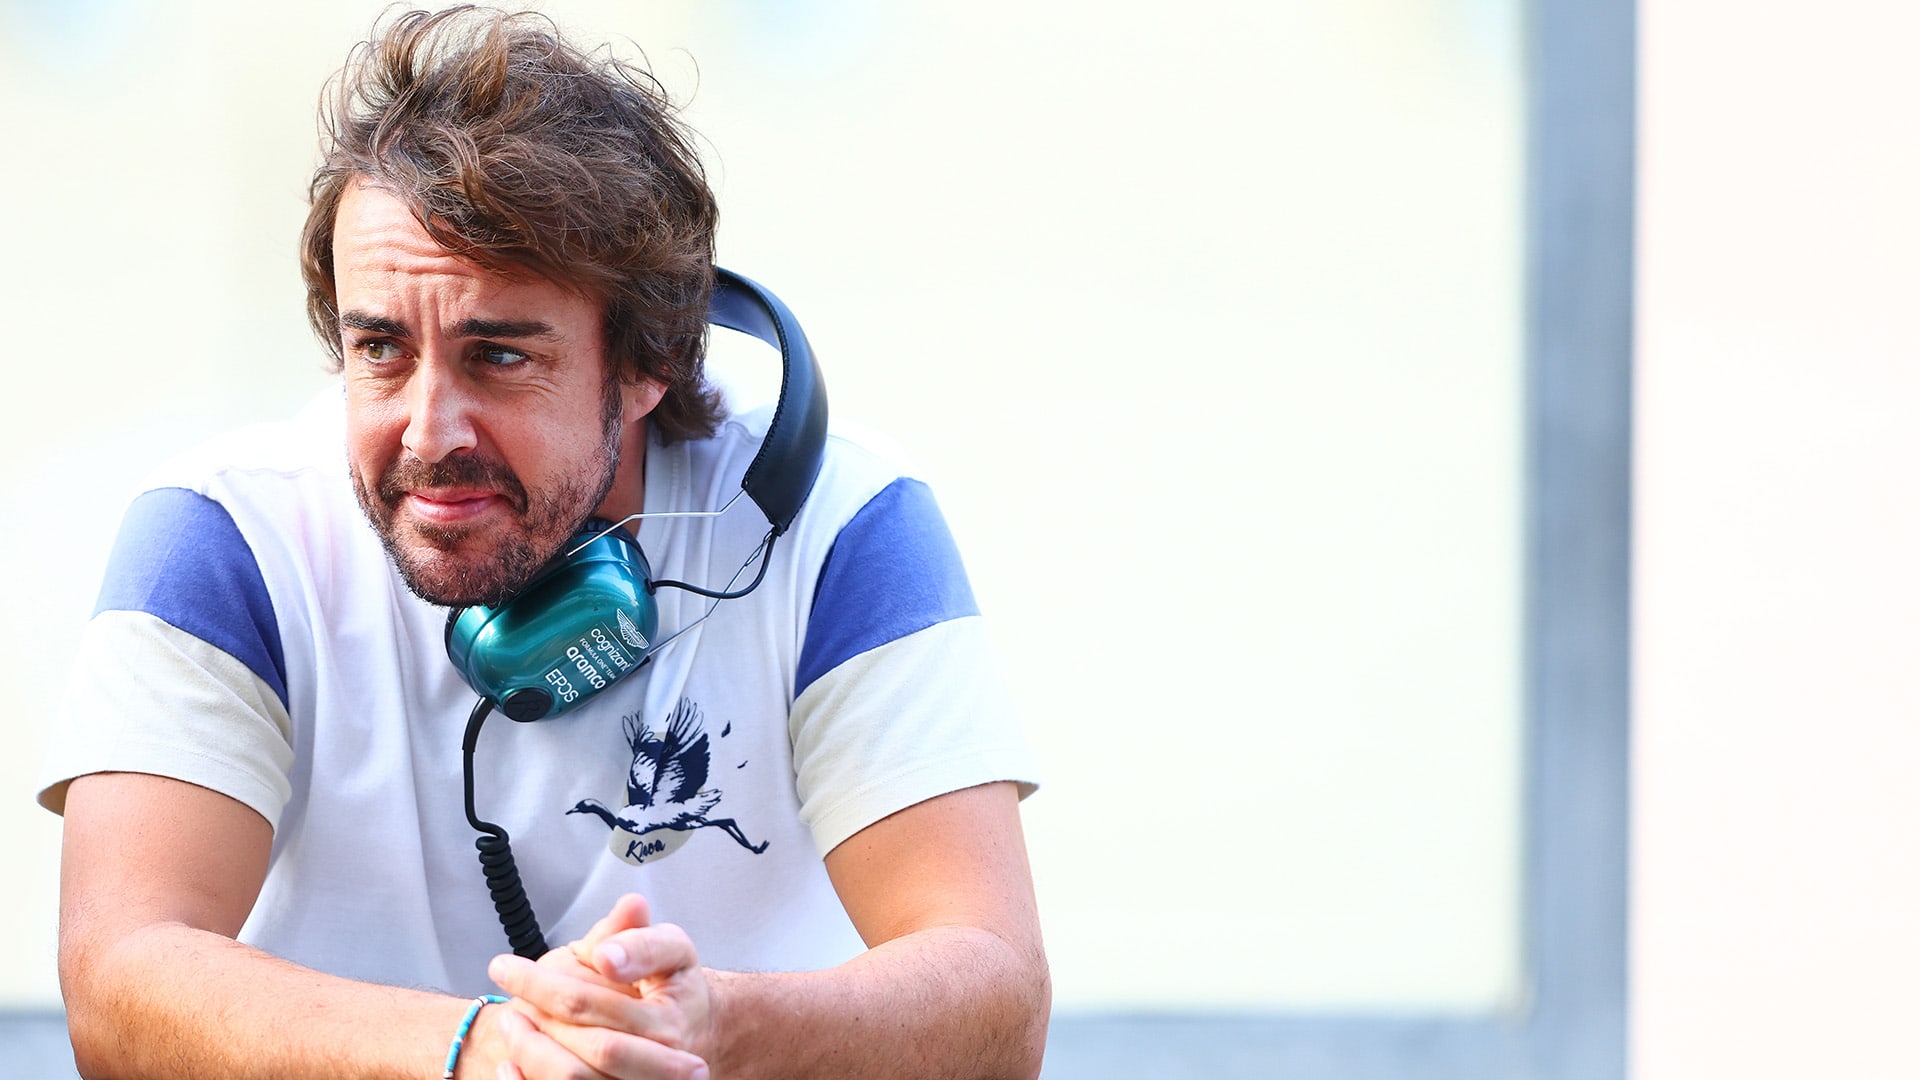 Aston knows high 'calibre' Alonso could make life difficult